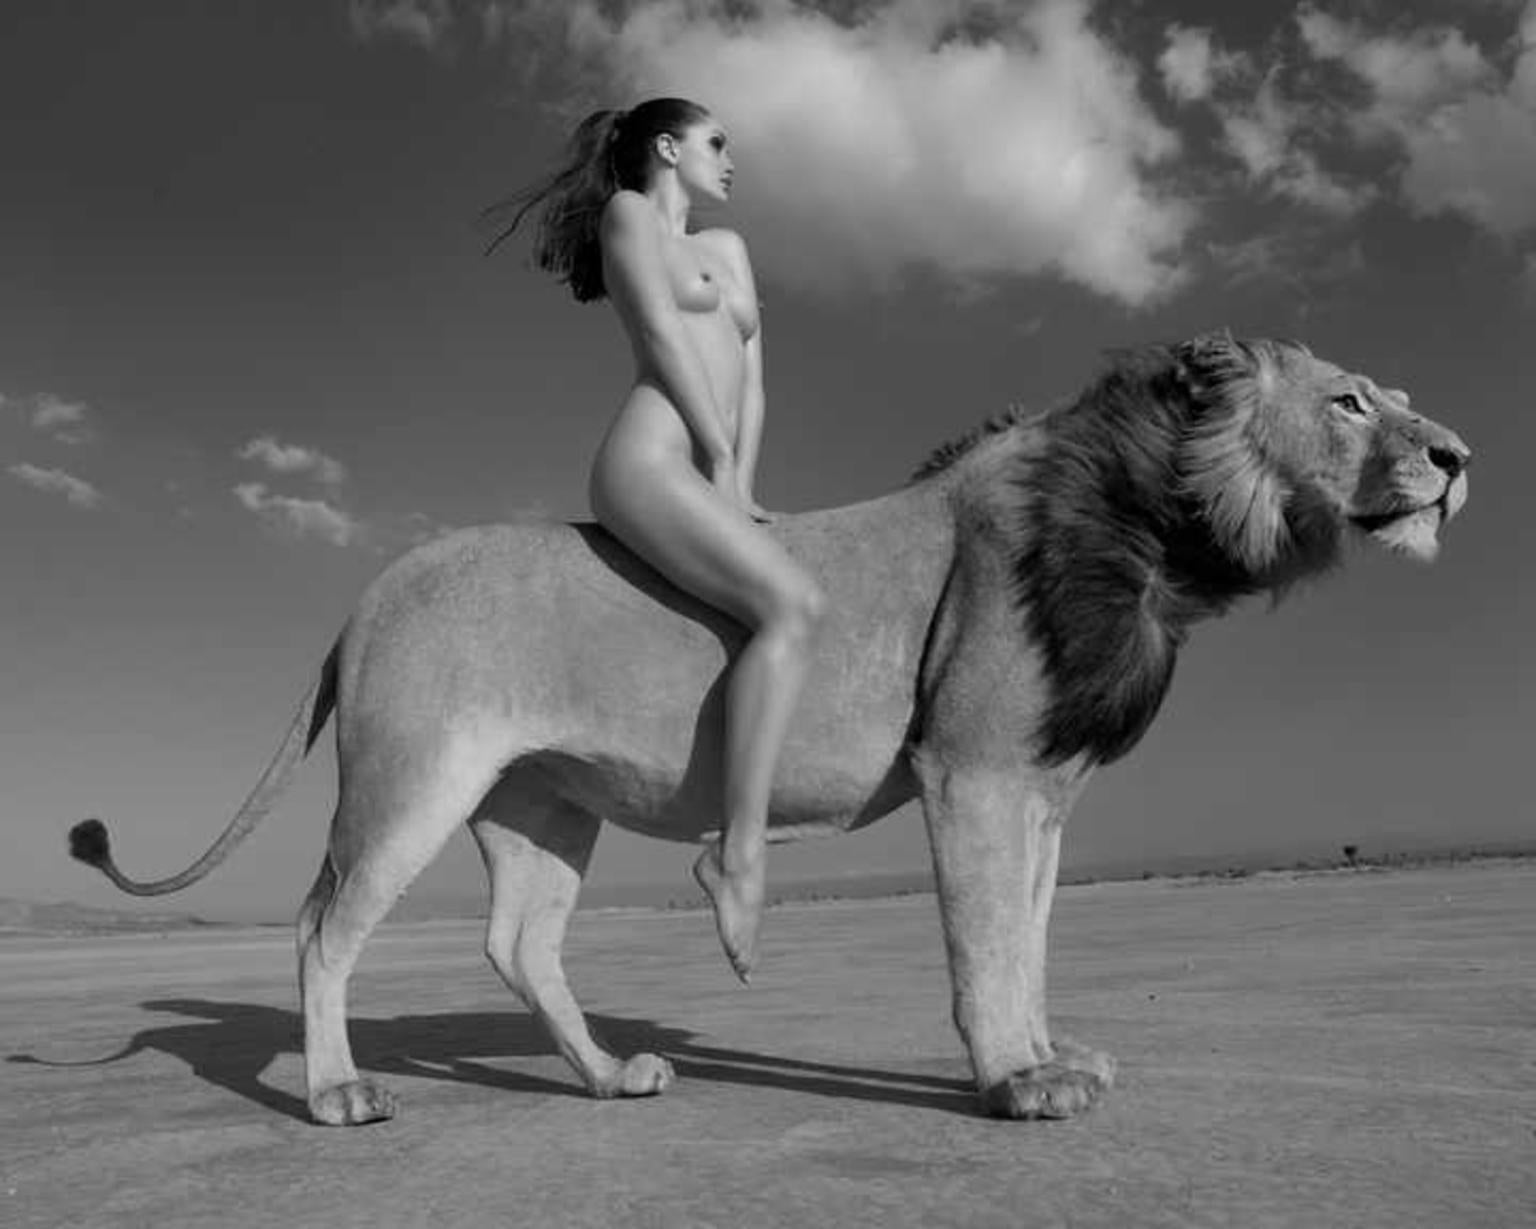 Angela rides the lion - portrait of a female nude riding a lion in the dese...